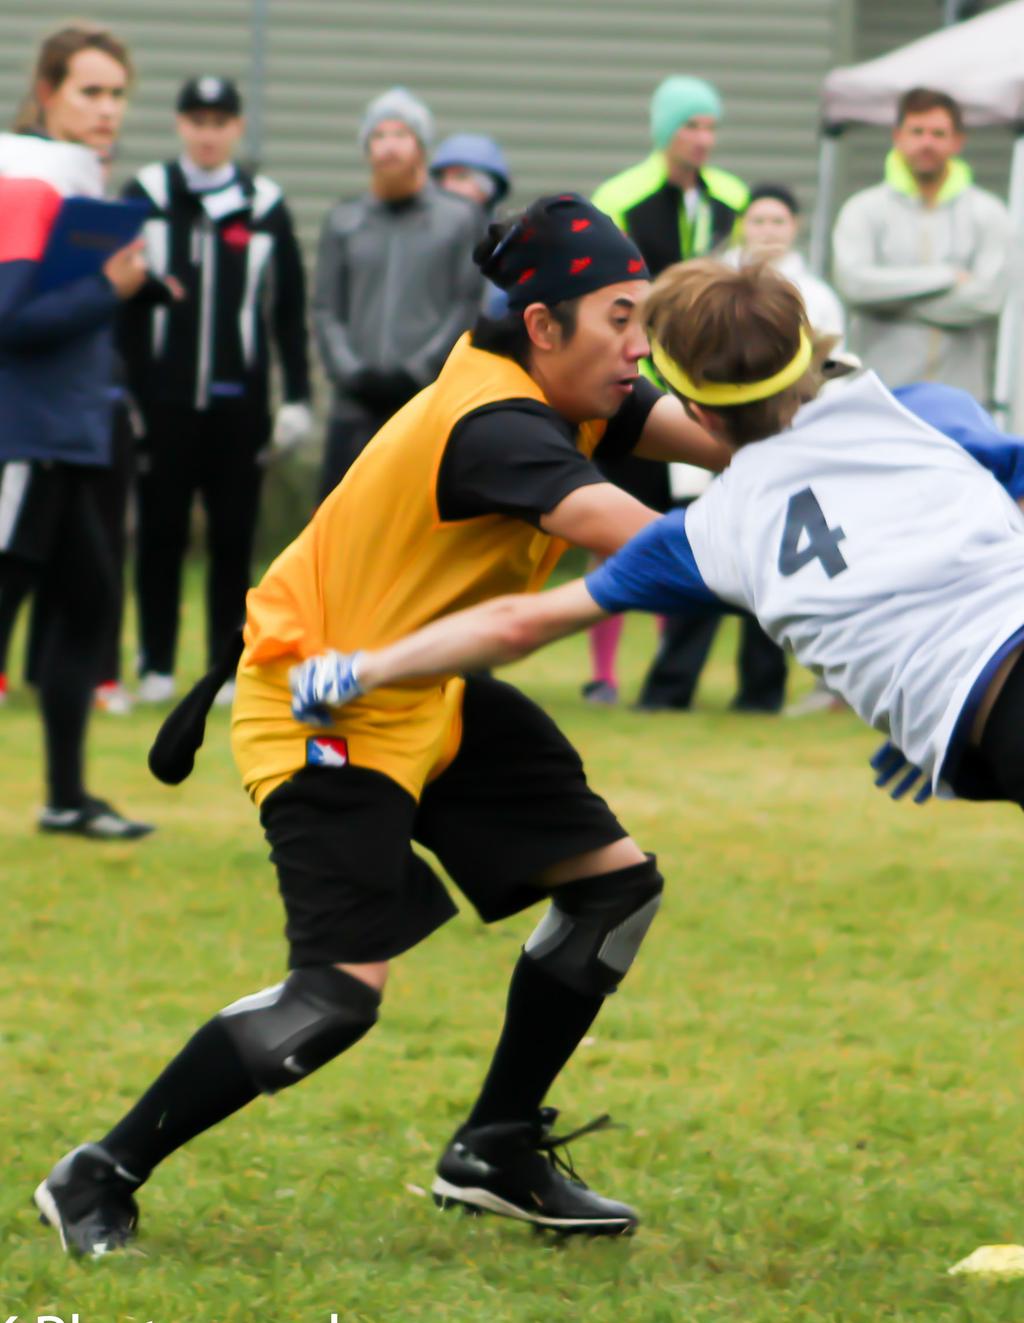 5 BENEFITS FOR HOST Quidditch Canada is dedicated to growing quidditch at the local, national, and international level while highlighting talented teams and players.